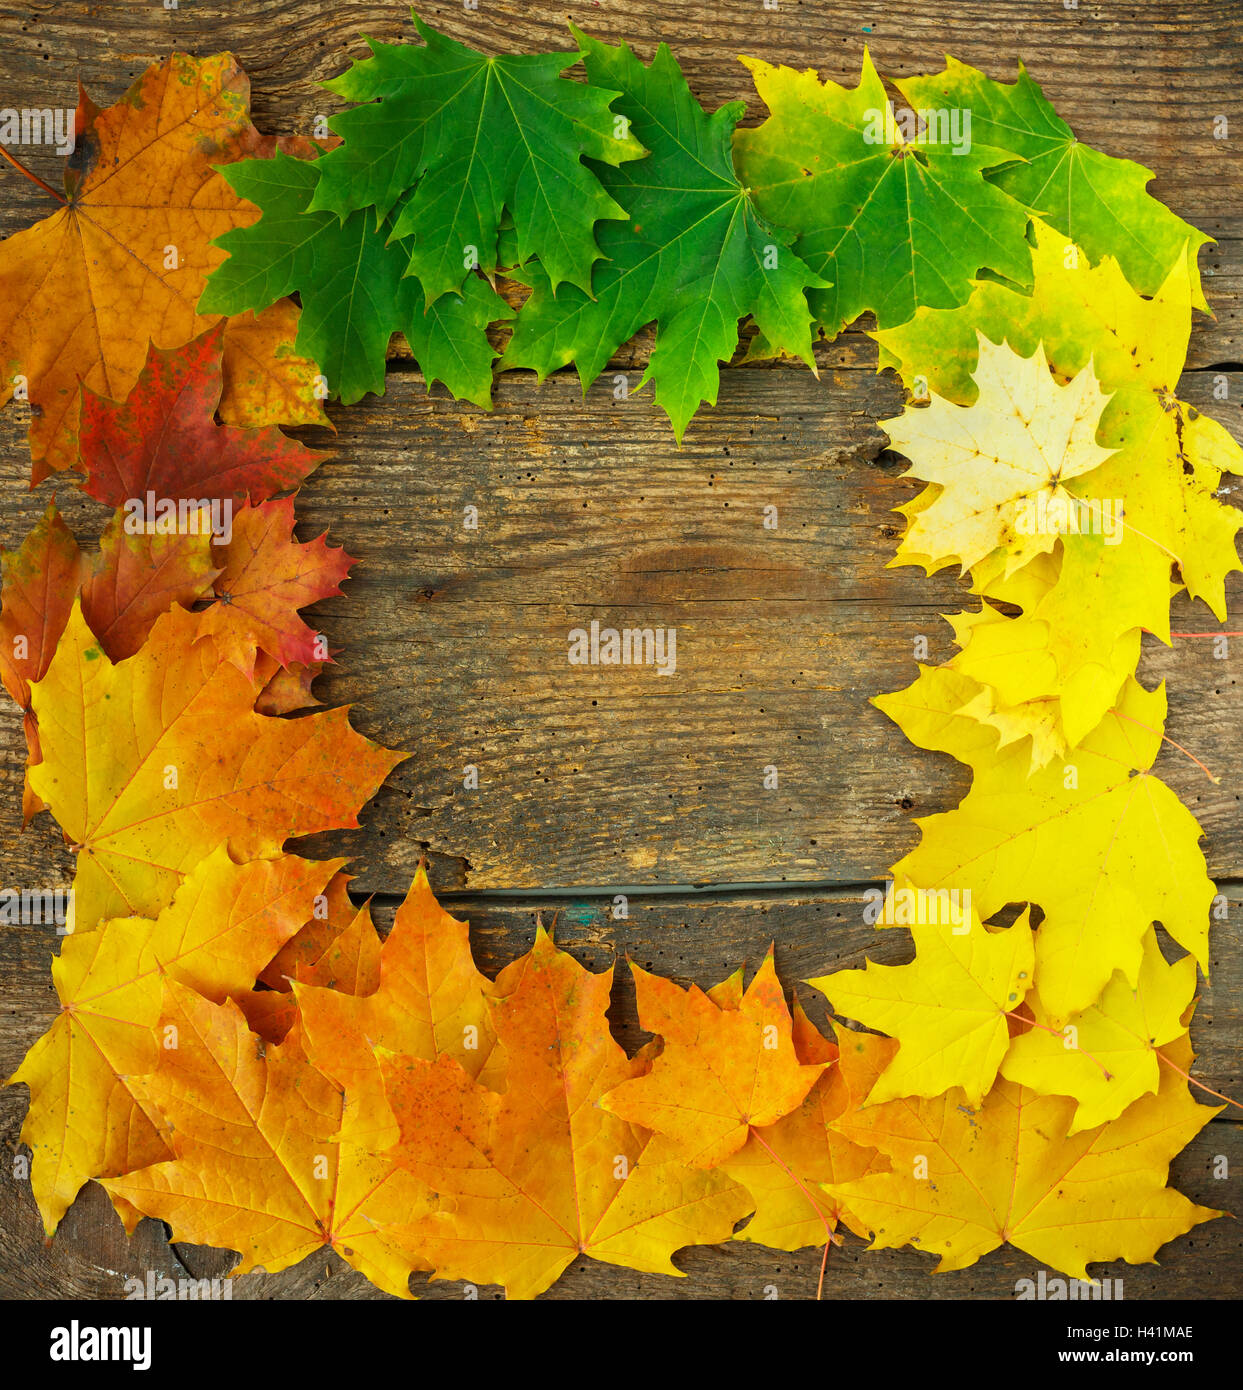 Autumn maple leaves falling frame on wooden background Stock Photo